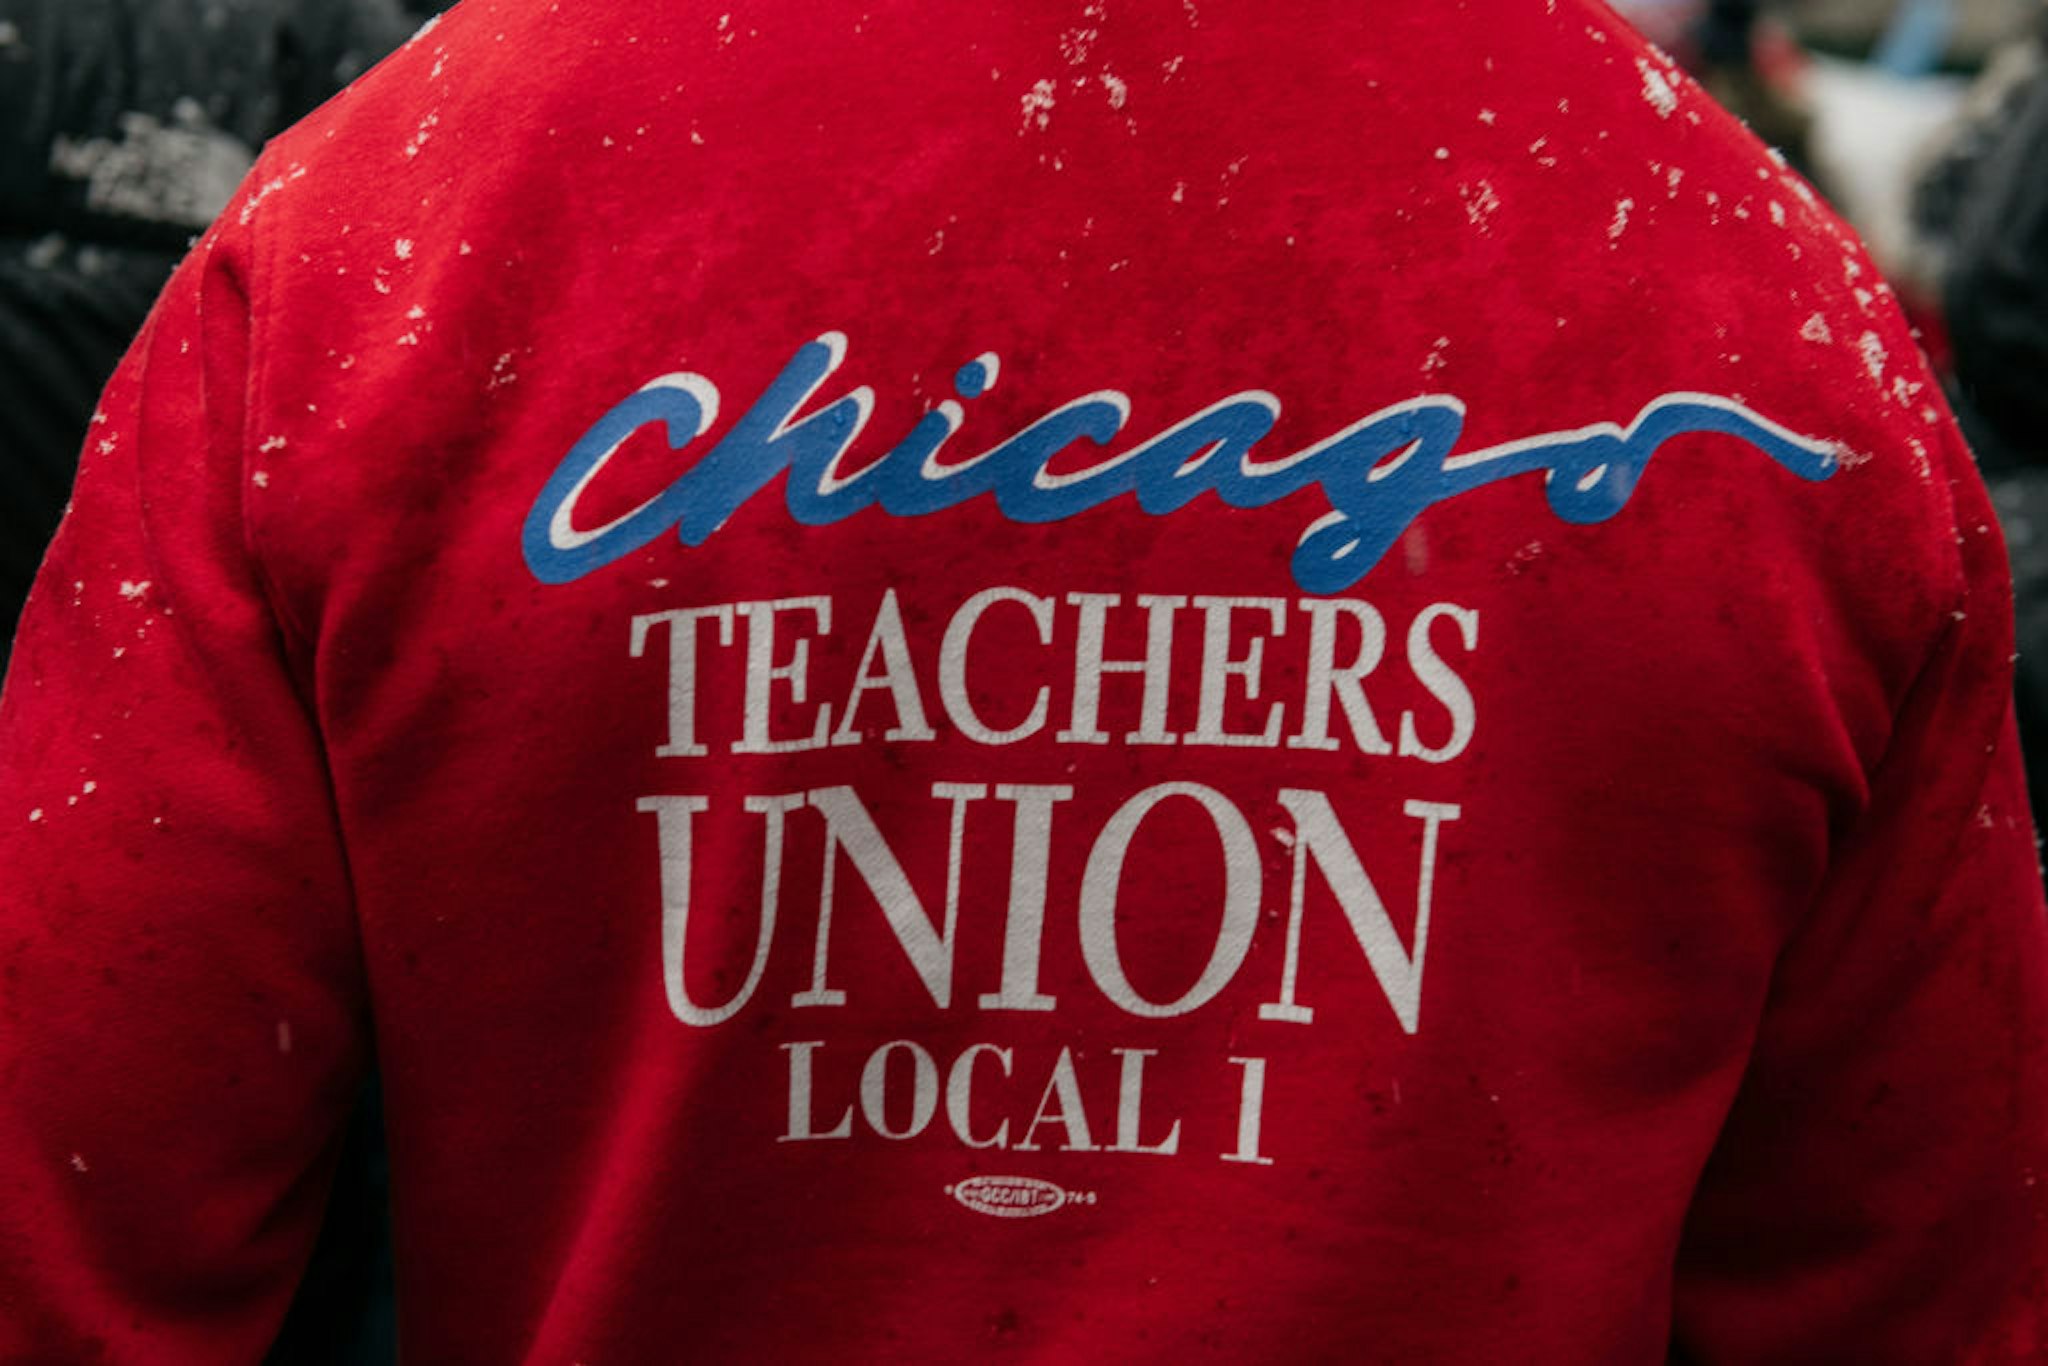 CHICAGO, IL - OCTOBER 31: Braving snow and cold temperatures, thousands marched through the streets near City Hall during the 11th day of an ongoing teachers strike on October 31, 2019 in Chicago, Illinois. Union leadership has announced a tentative agreement on a new contract with Chicago Public Schools and Mayor Lori Lightfoot, but is refusing to return to work until paid teaching days lost during the strike are added to the year's school calendar. (Photo by Scott Heins/Getty Images)